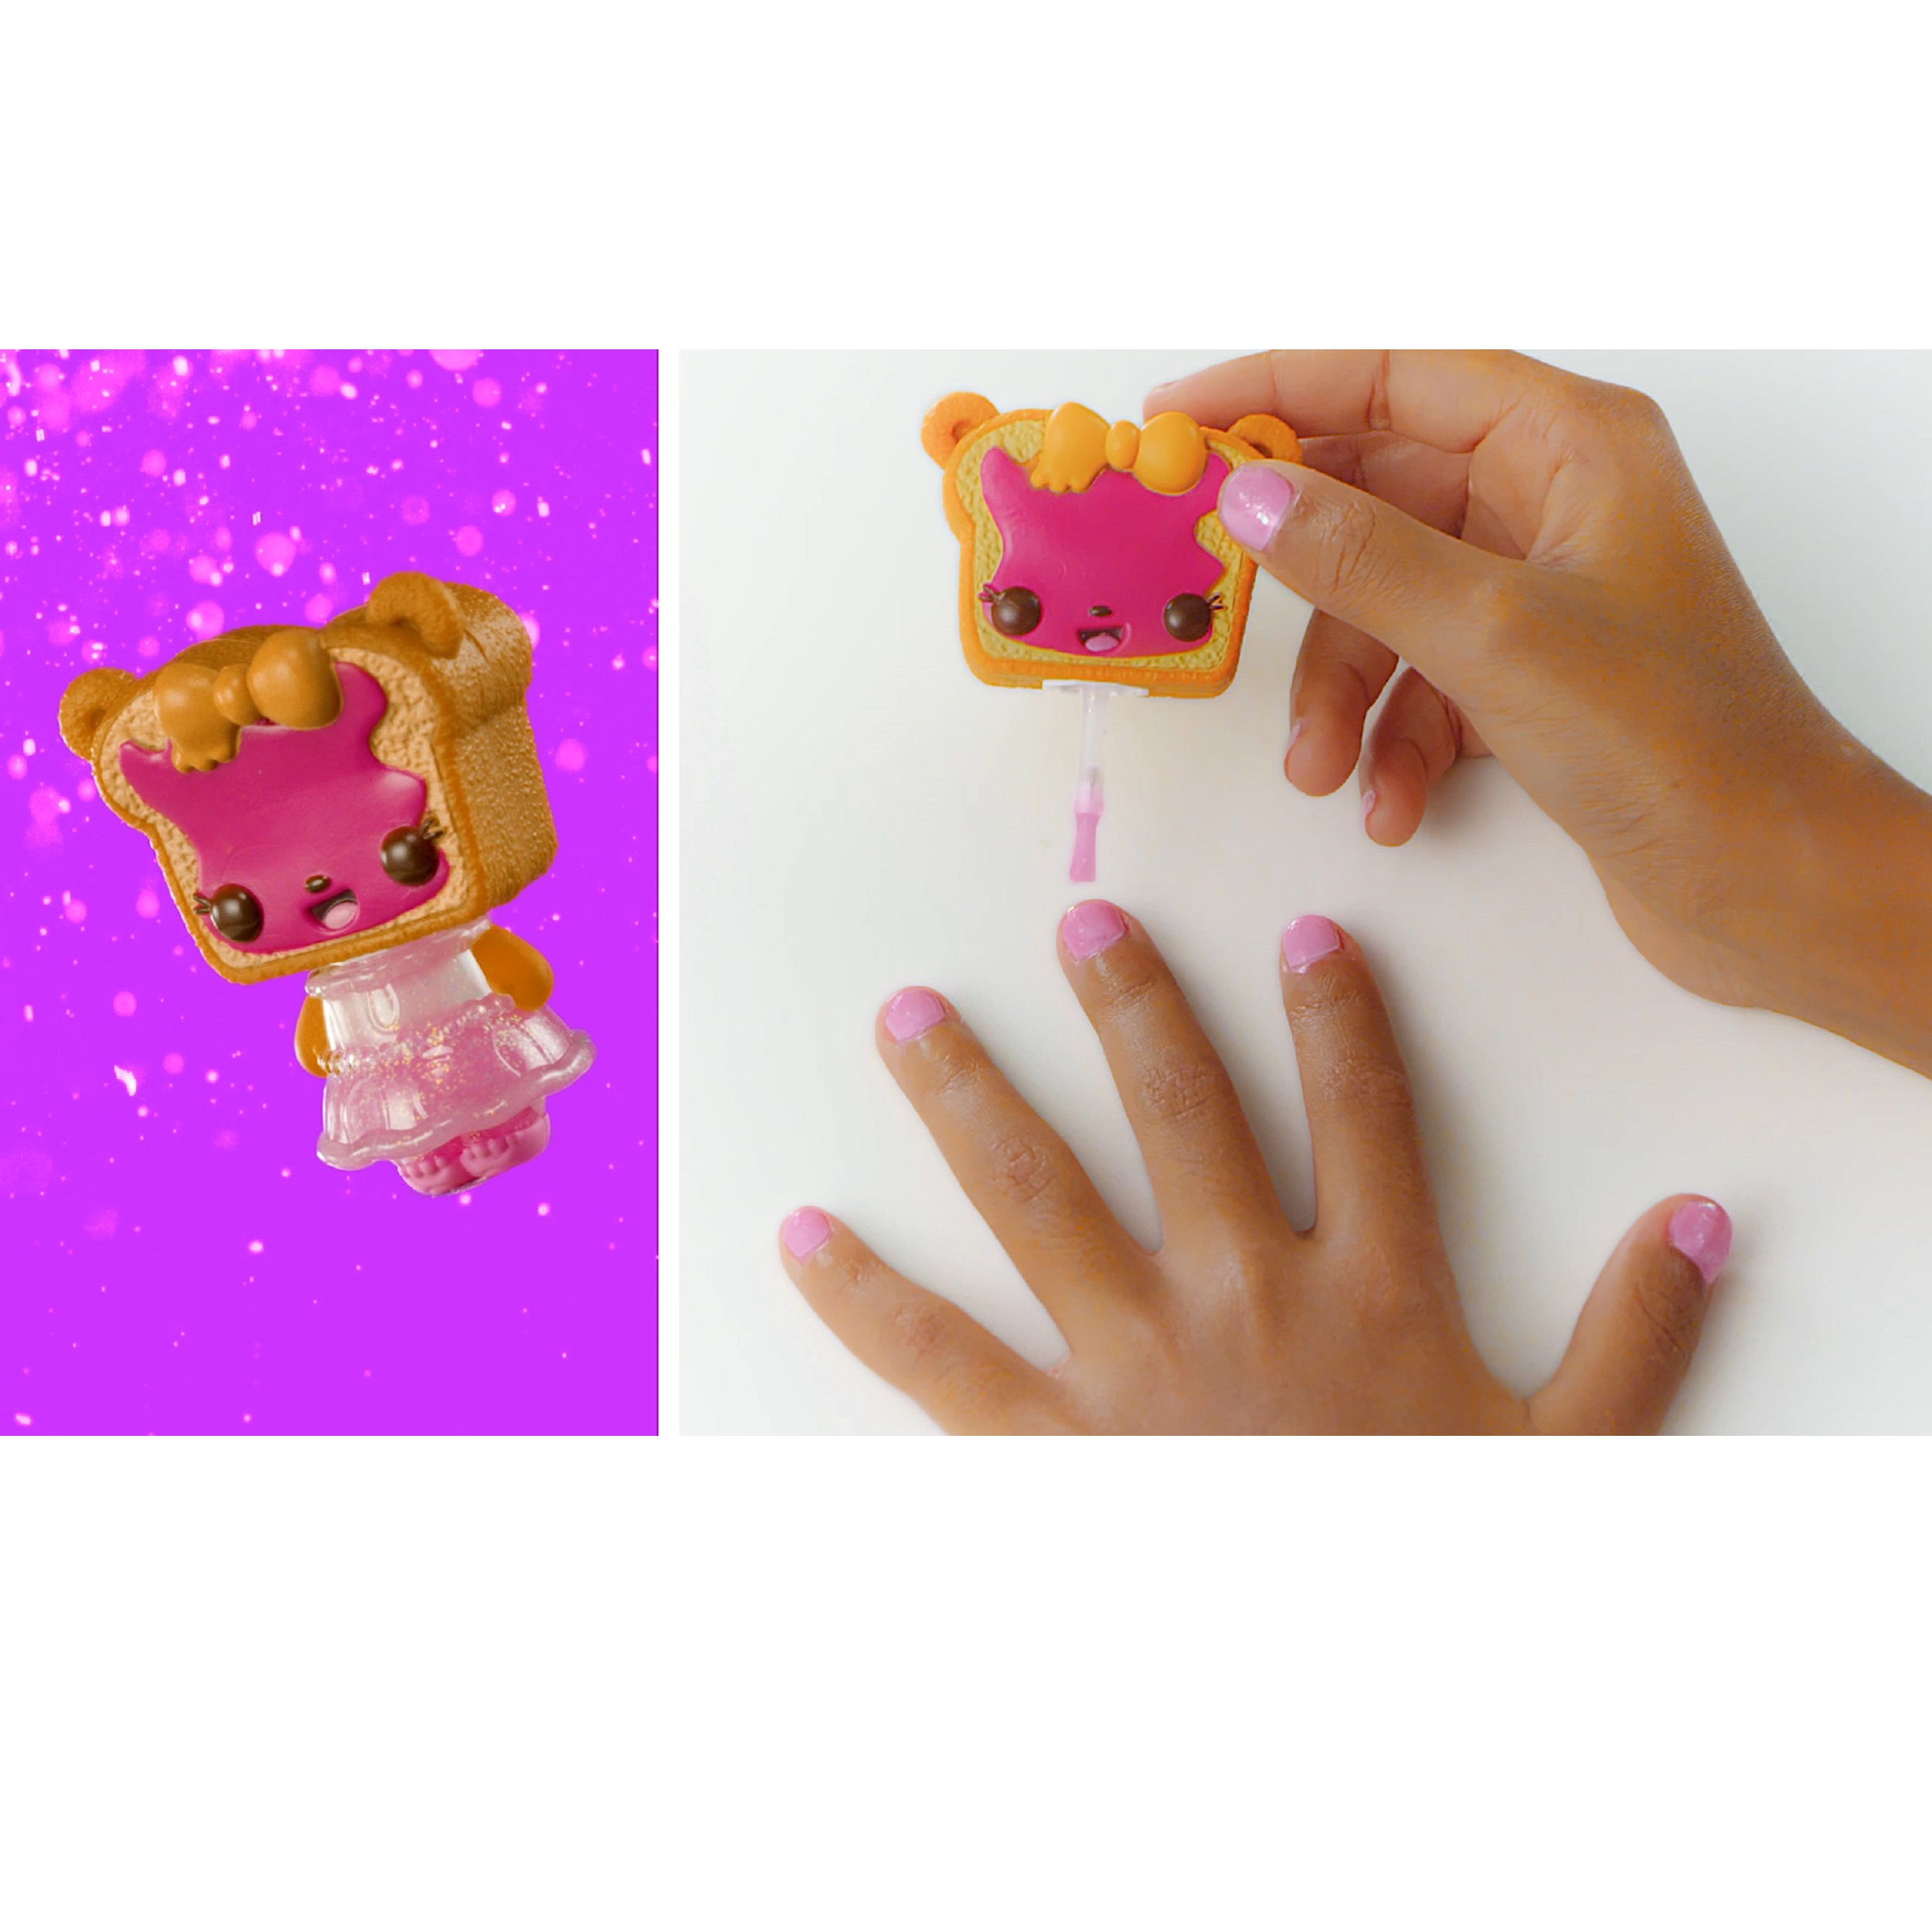 Num Noms Mystery Makeup with Hidden Cosmetics Inside - image 5 of 7